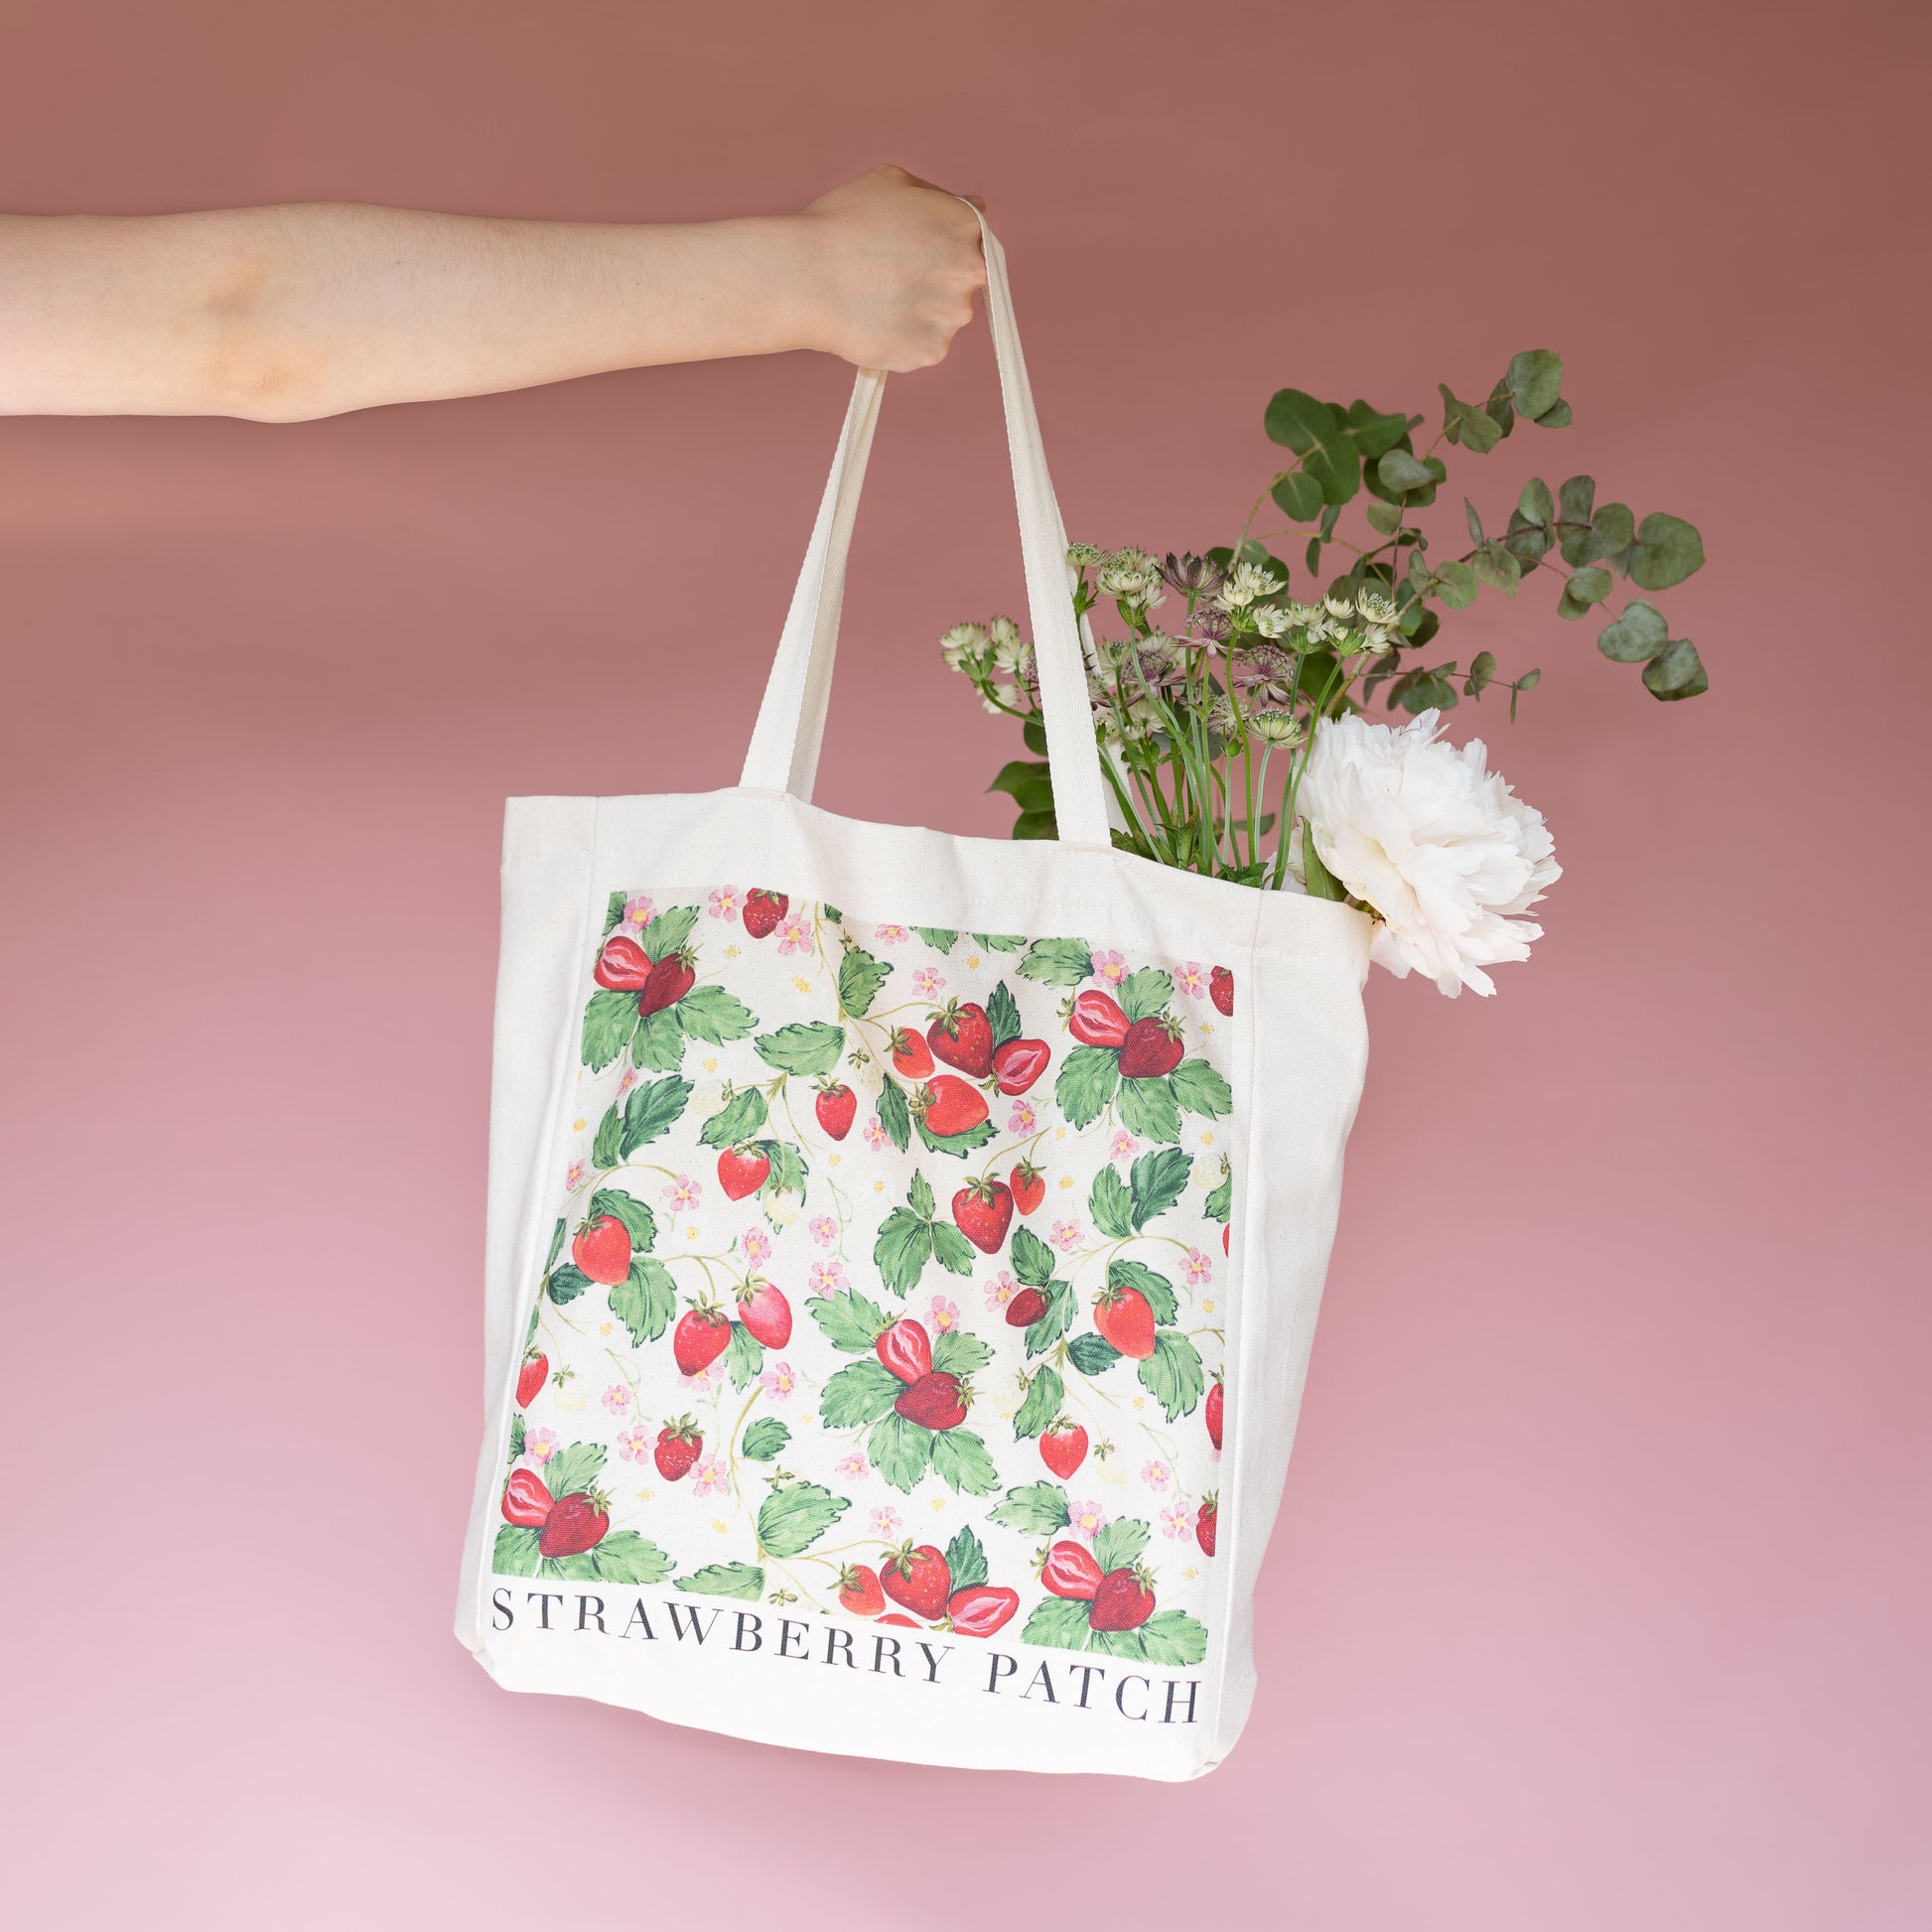 tote bag carrying farmer market flowers